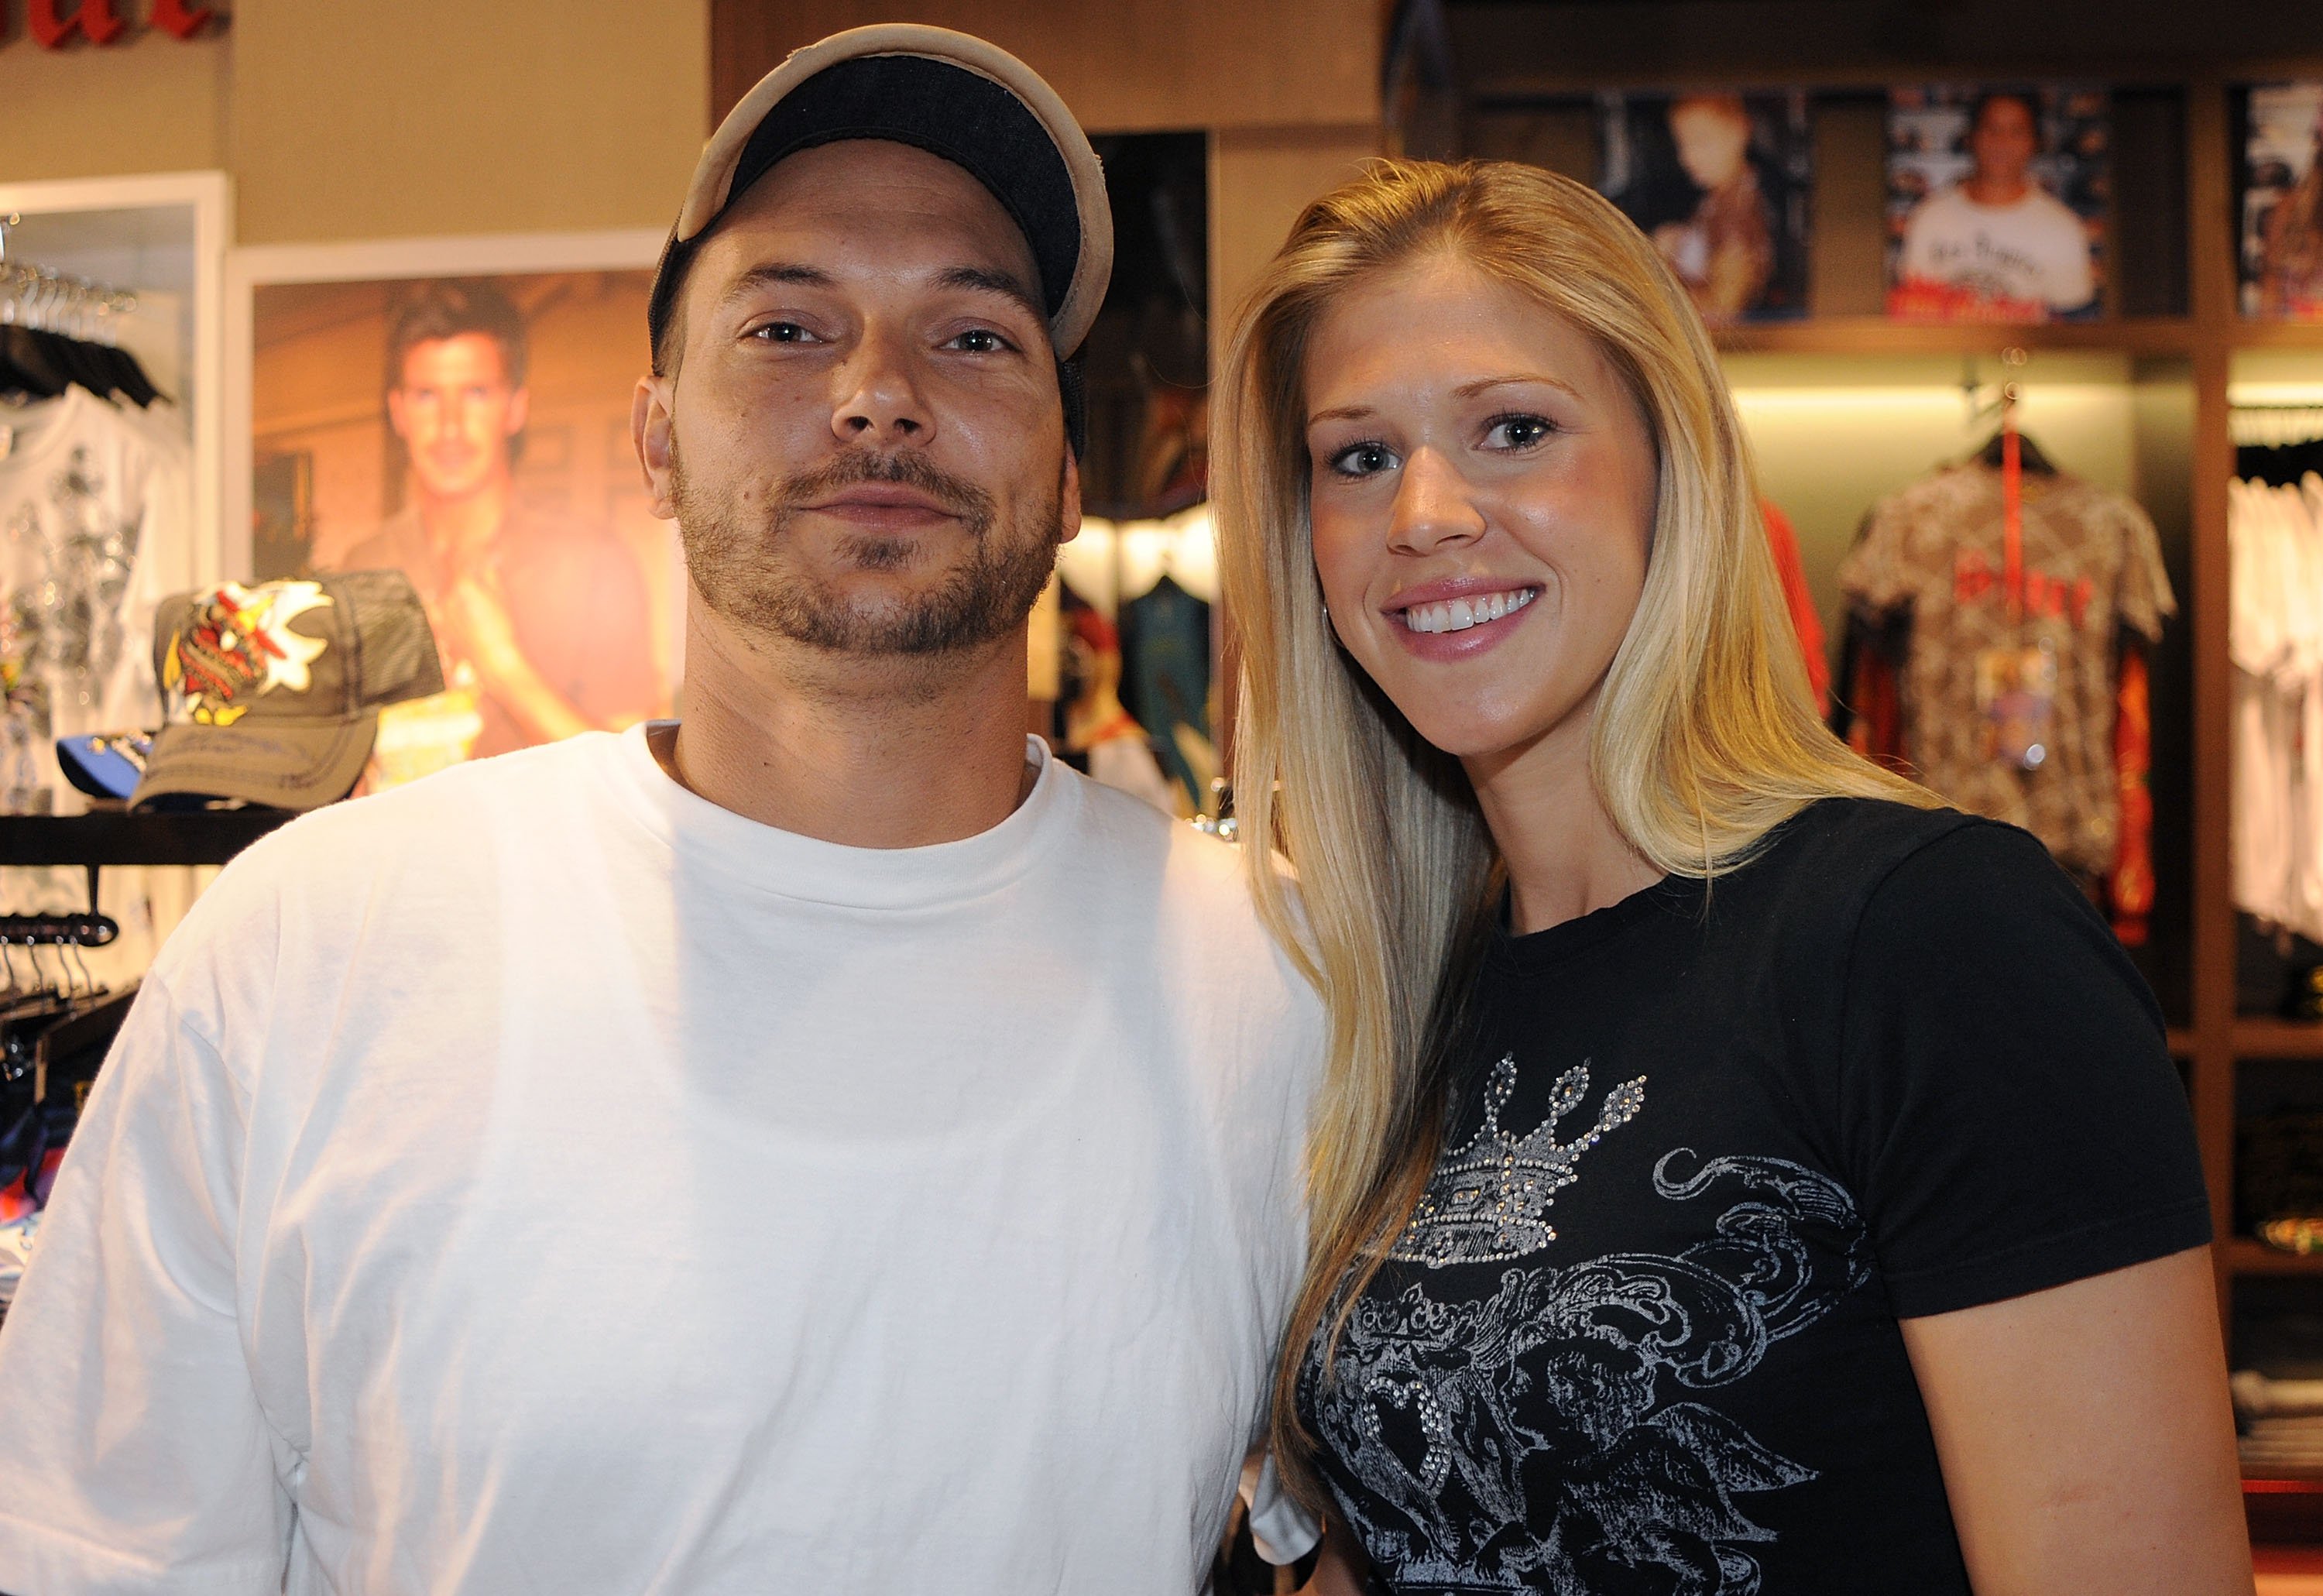 Kevin Federline appears with then-girlfriend, Victoria Prince at Ed Hardy Edward Street in 2009